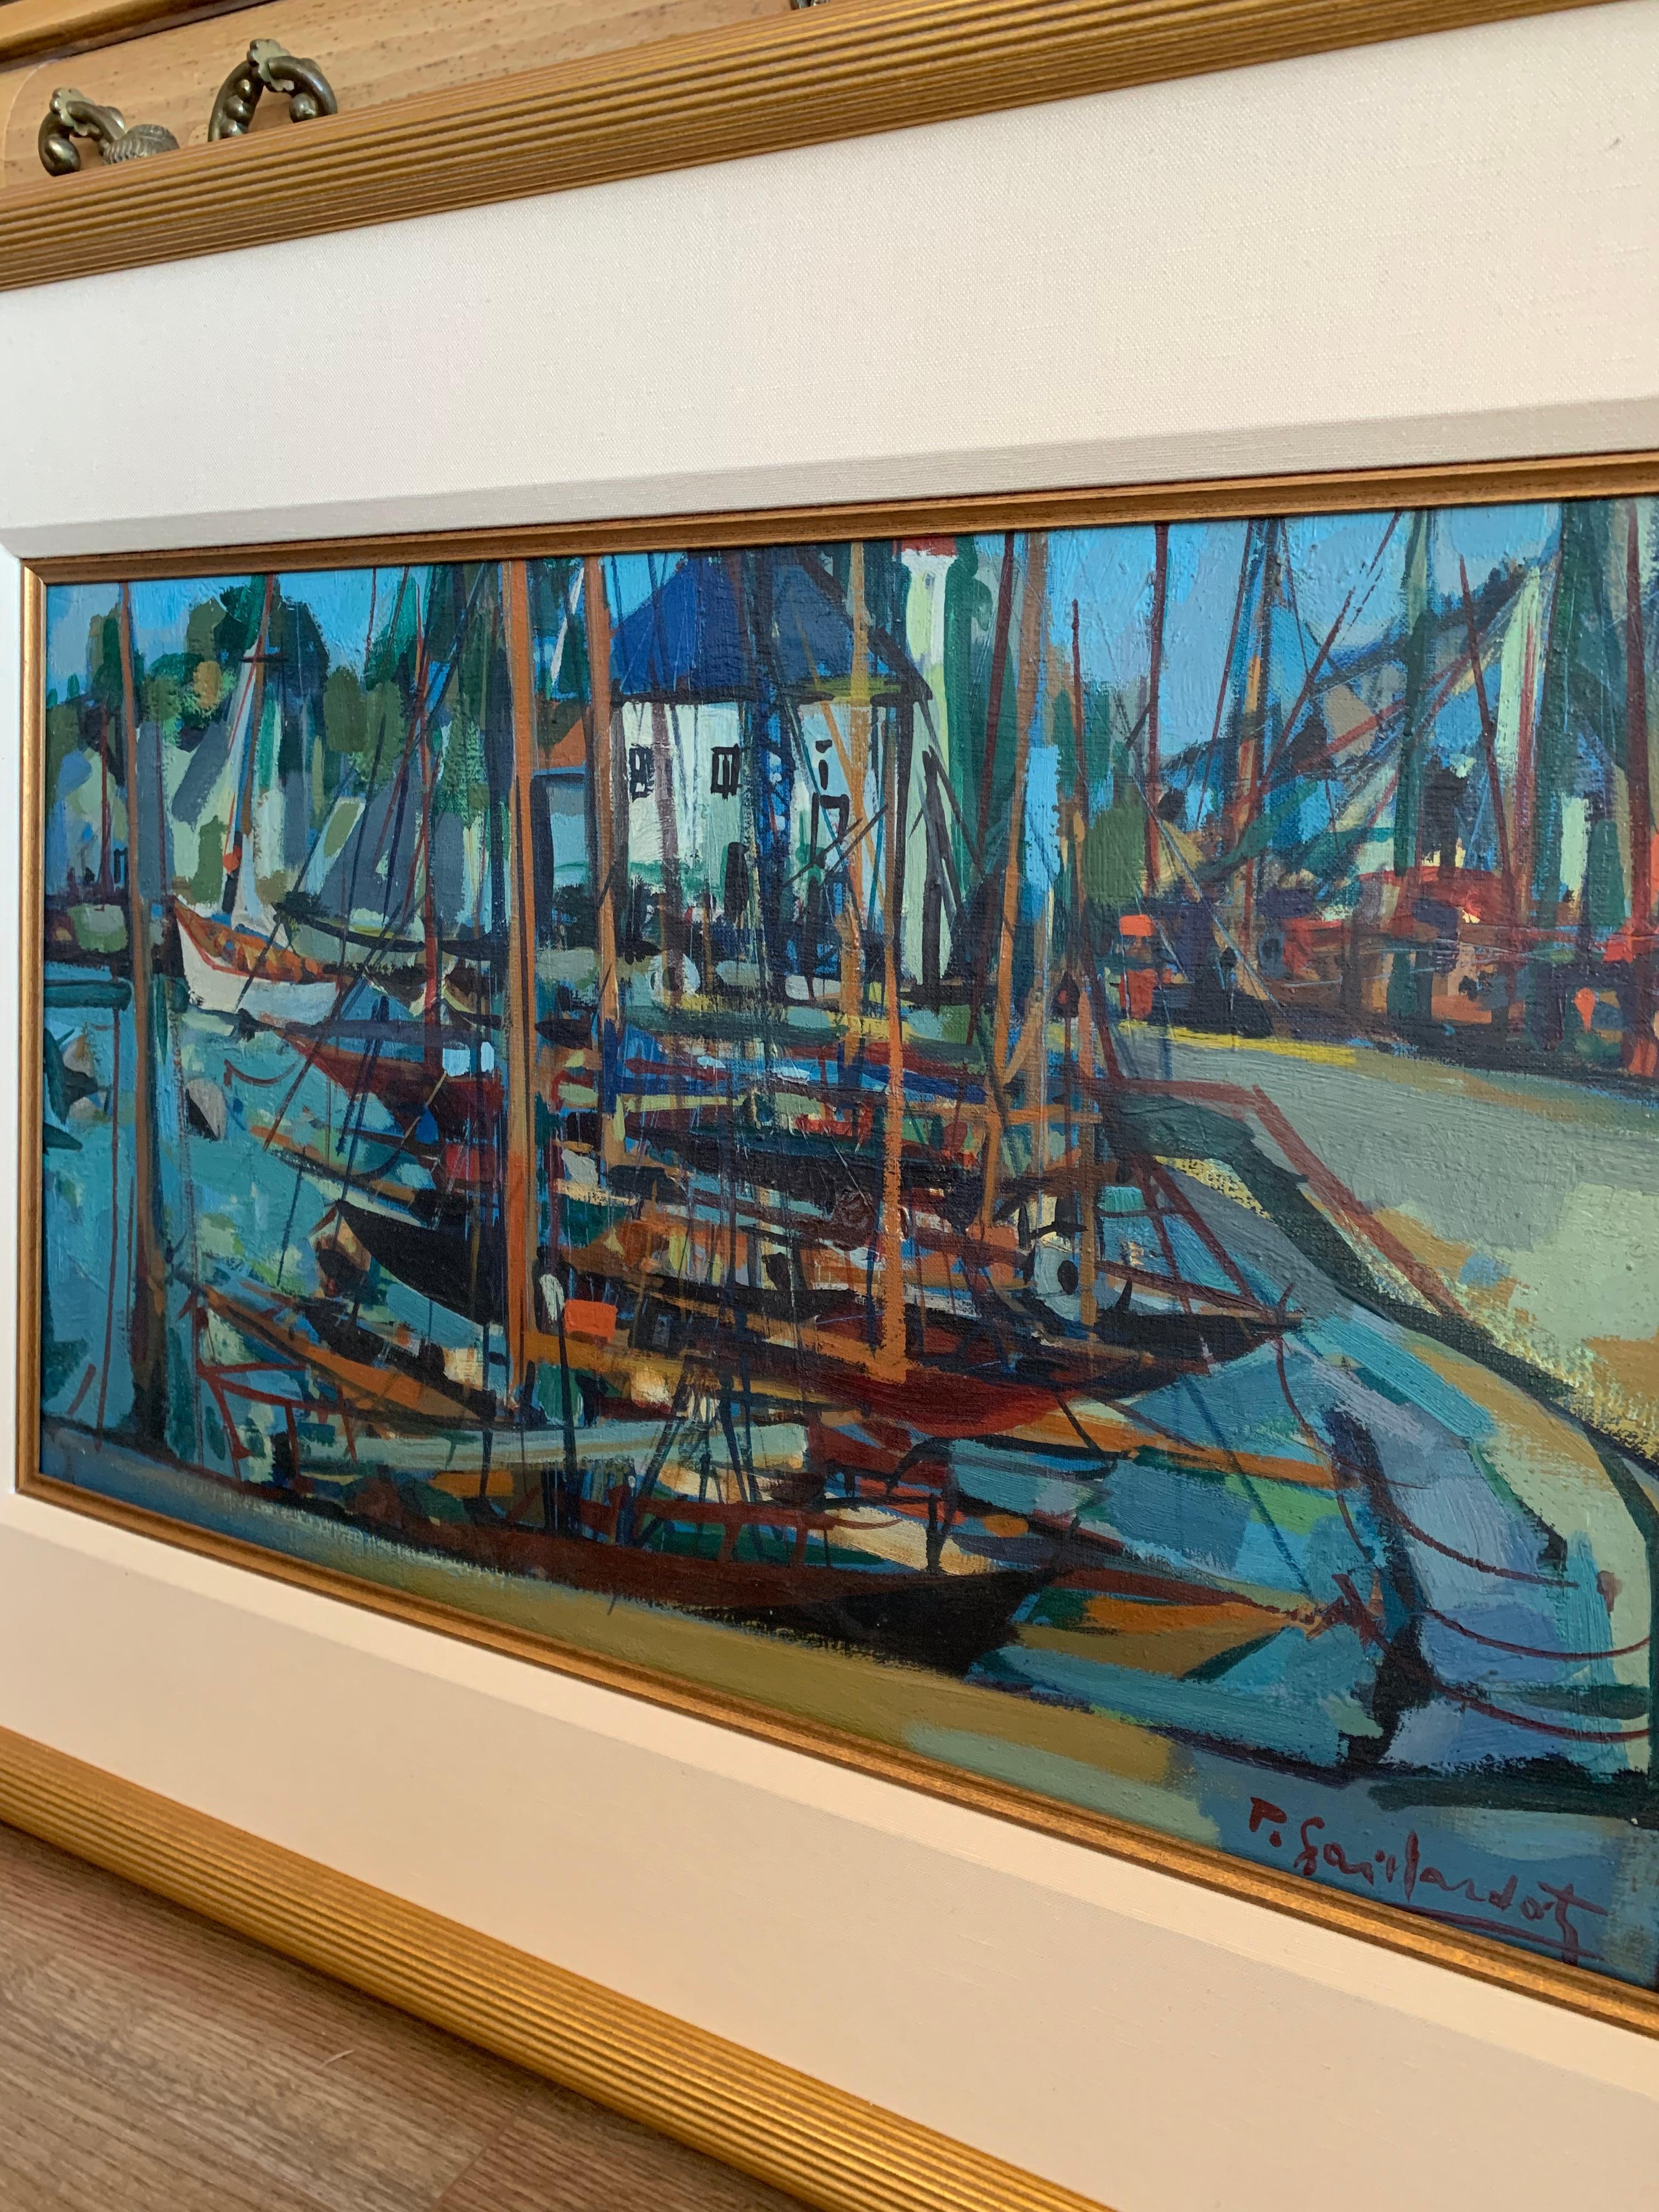 This beautiful oil painting of boats in the Brittany region of France also includes the gold frame with gold interlining.